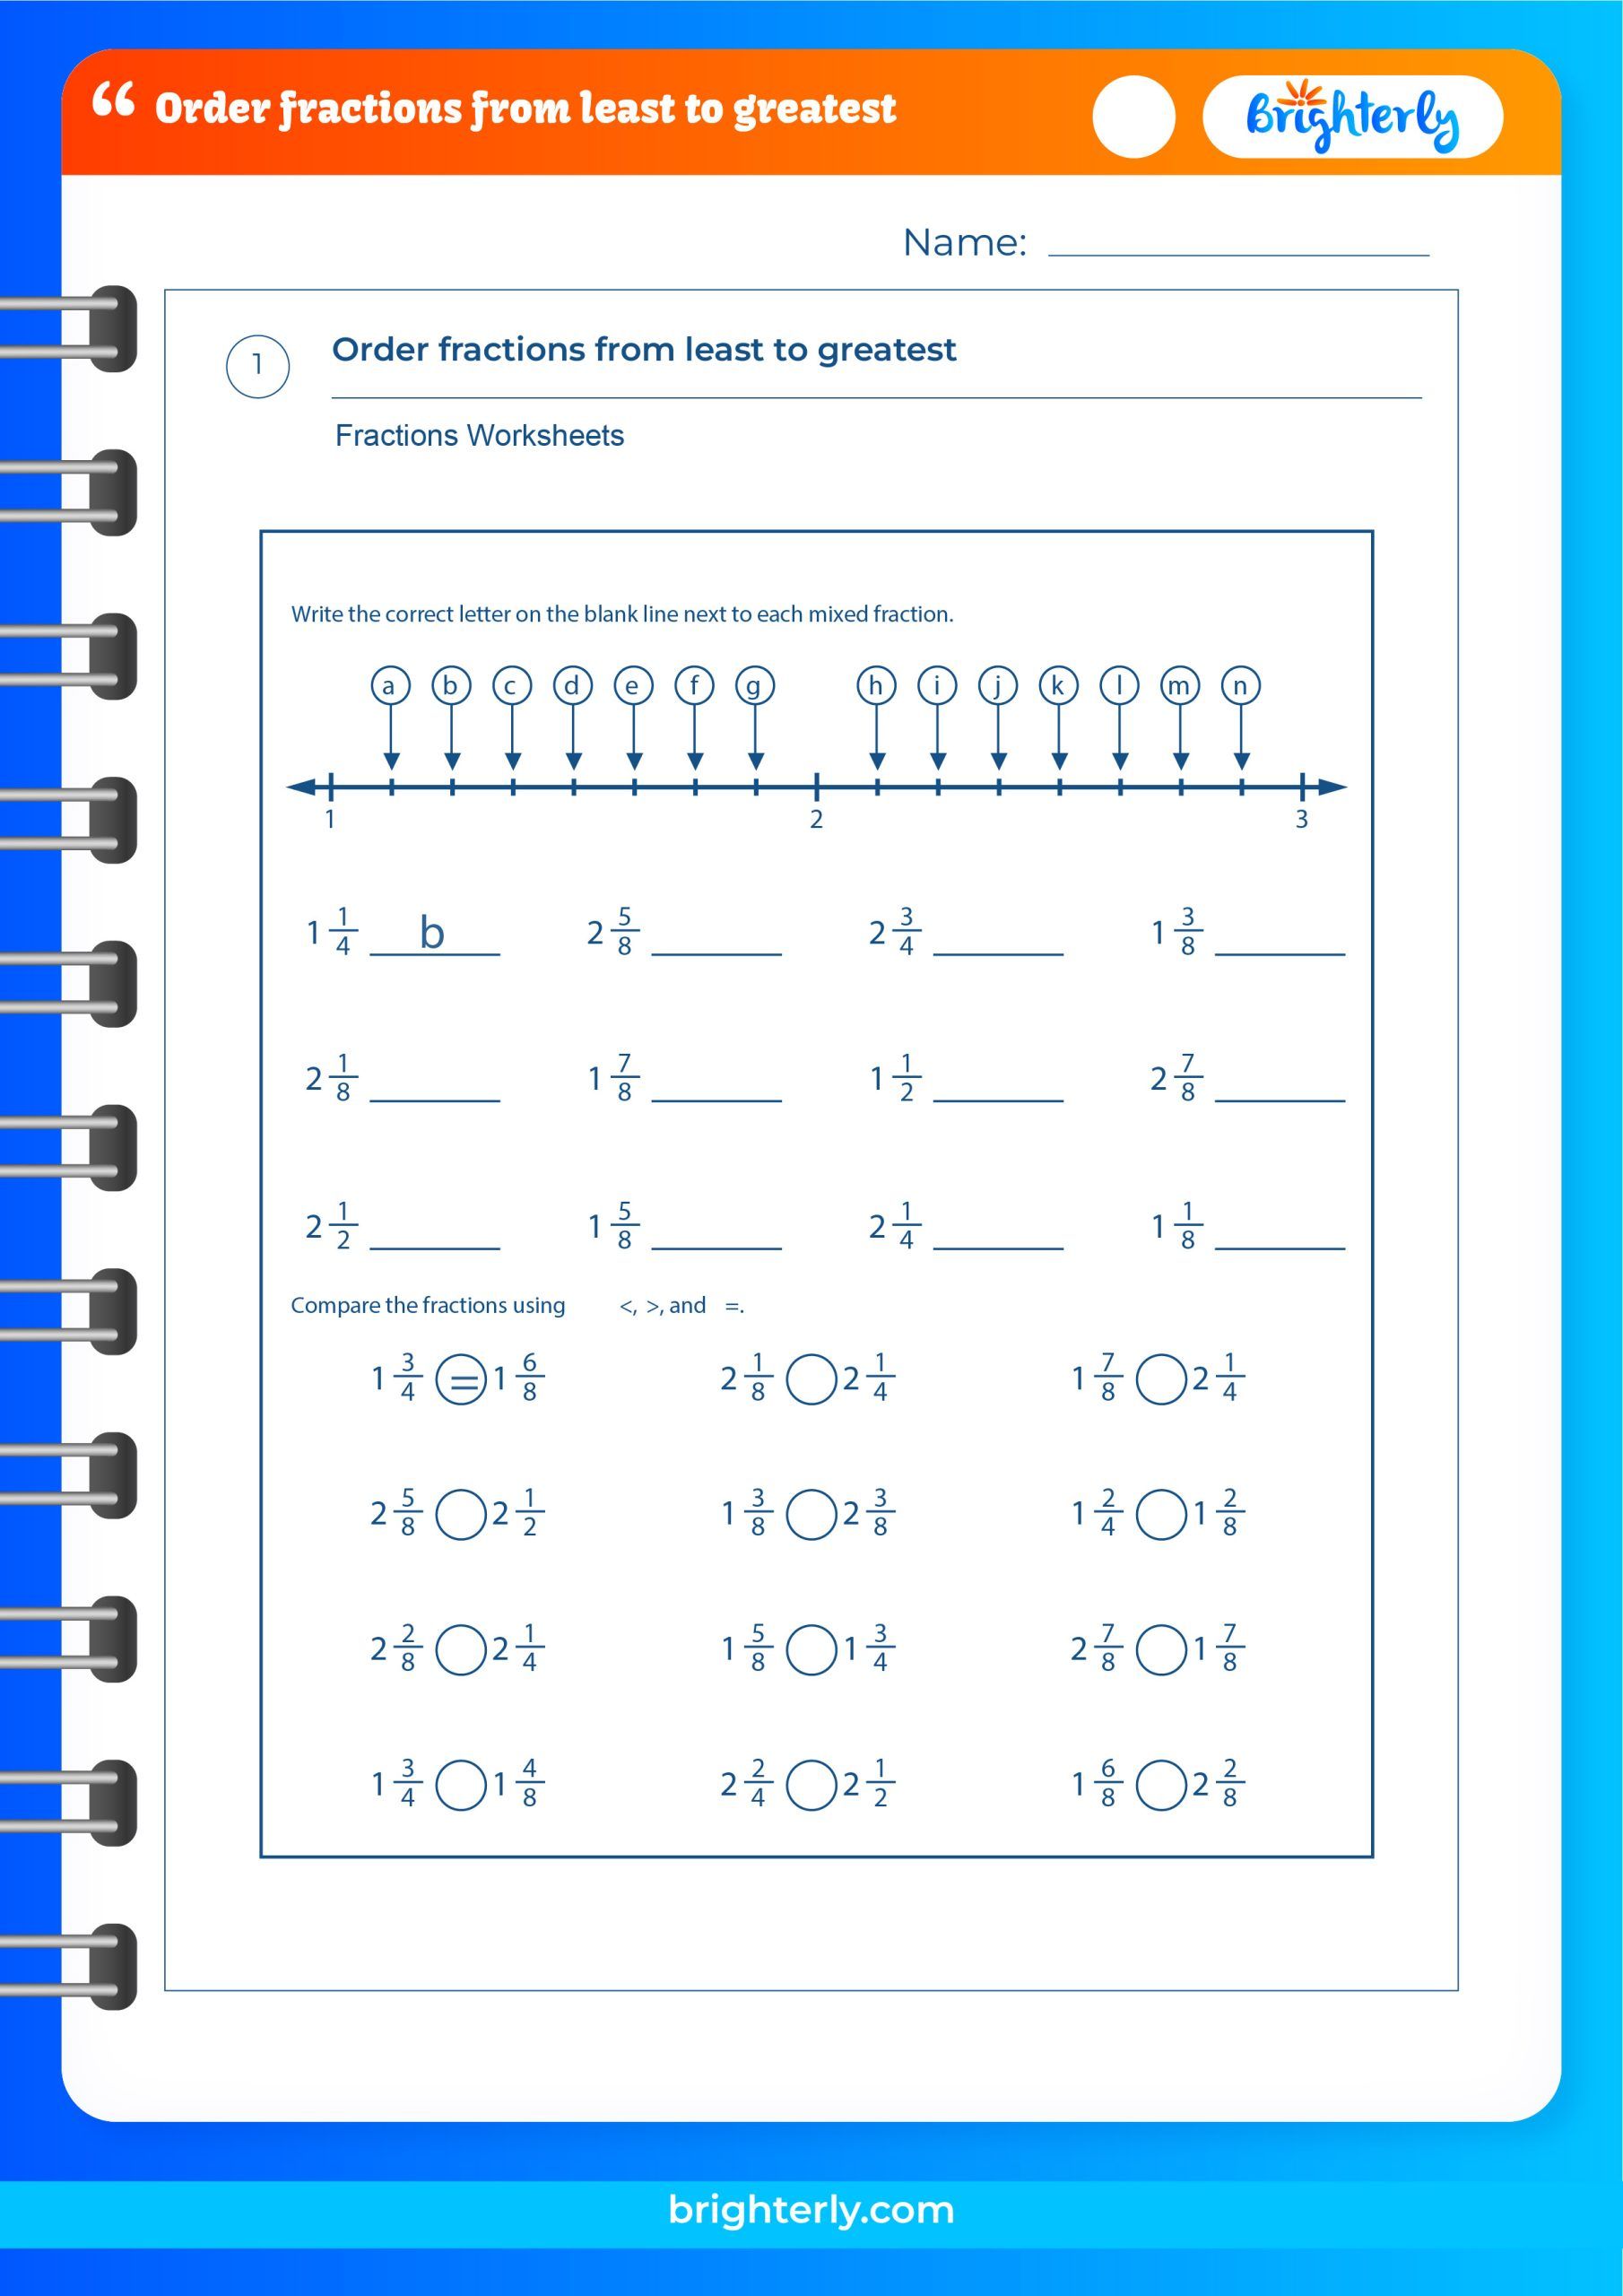 order-fractions-from-least-to-greatest-worksheets-pdfs